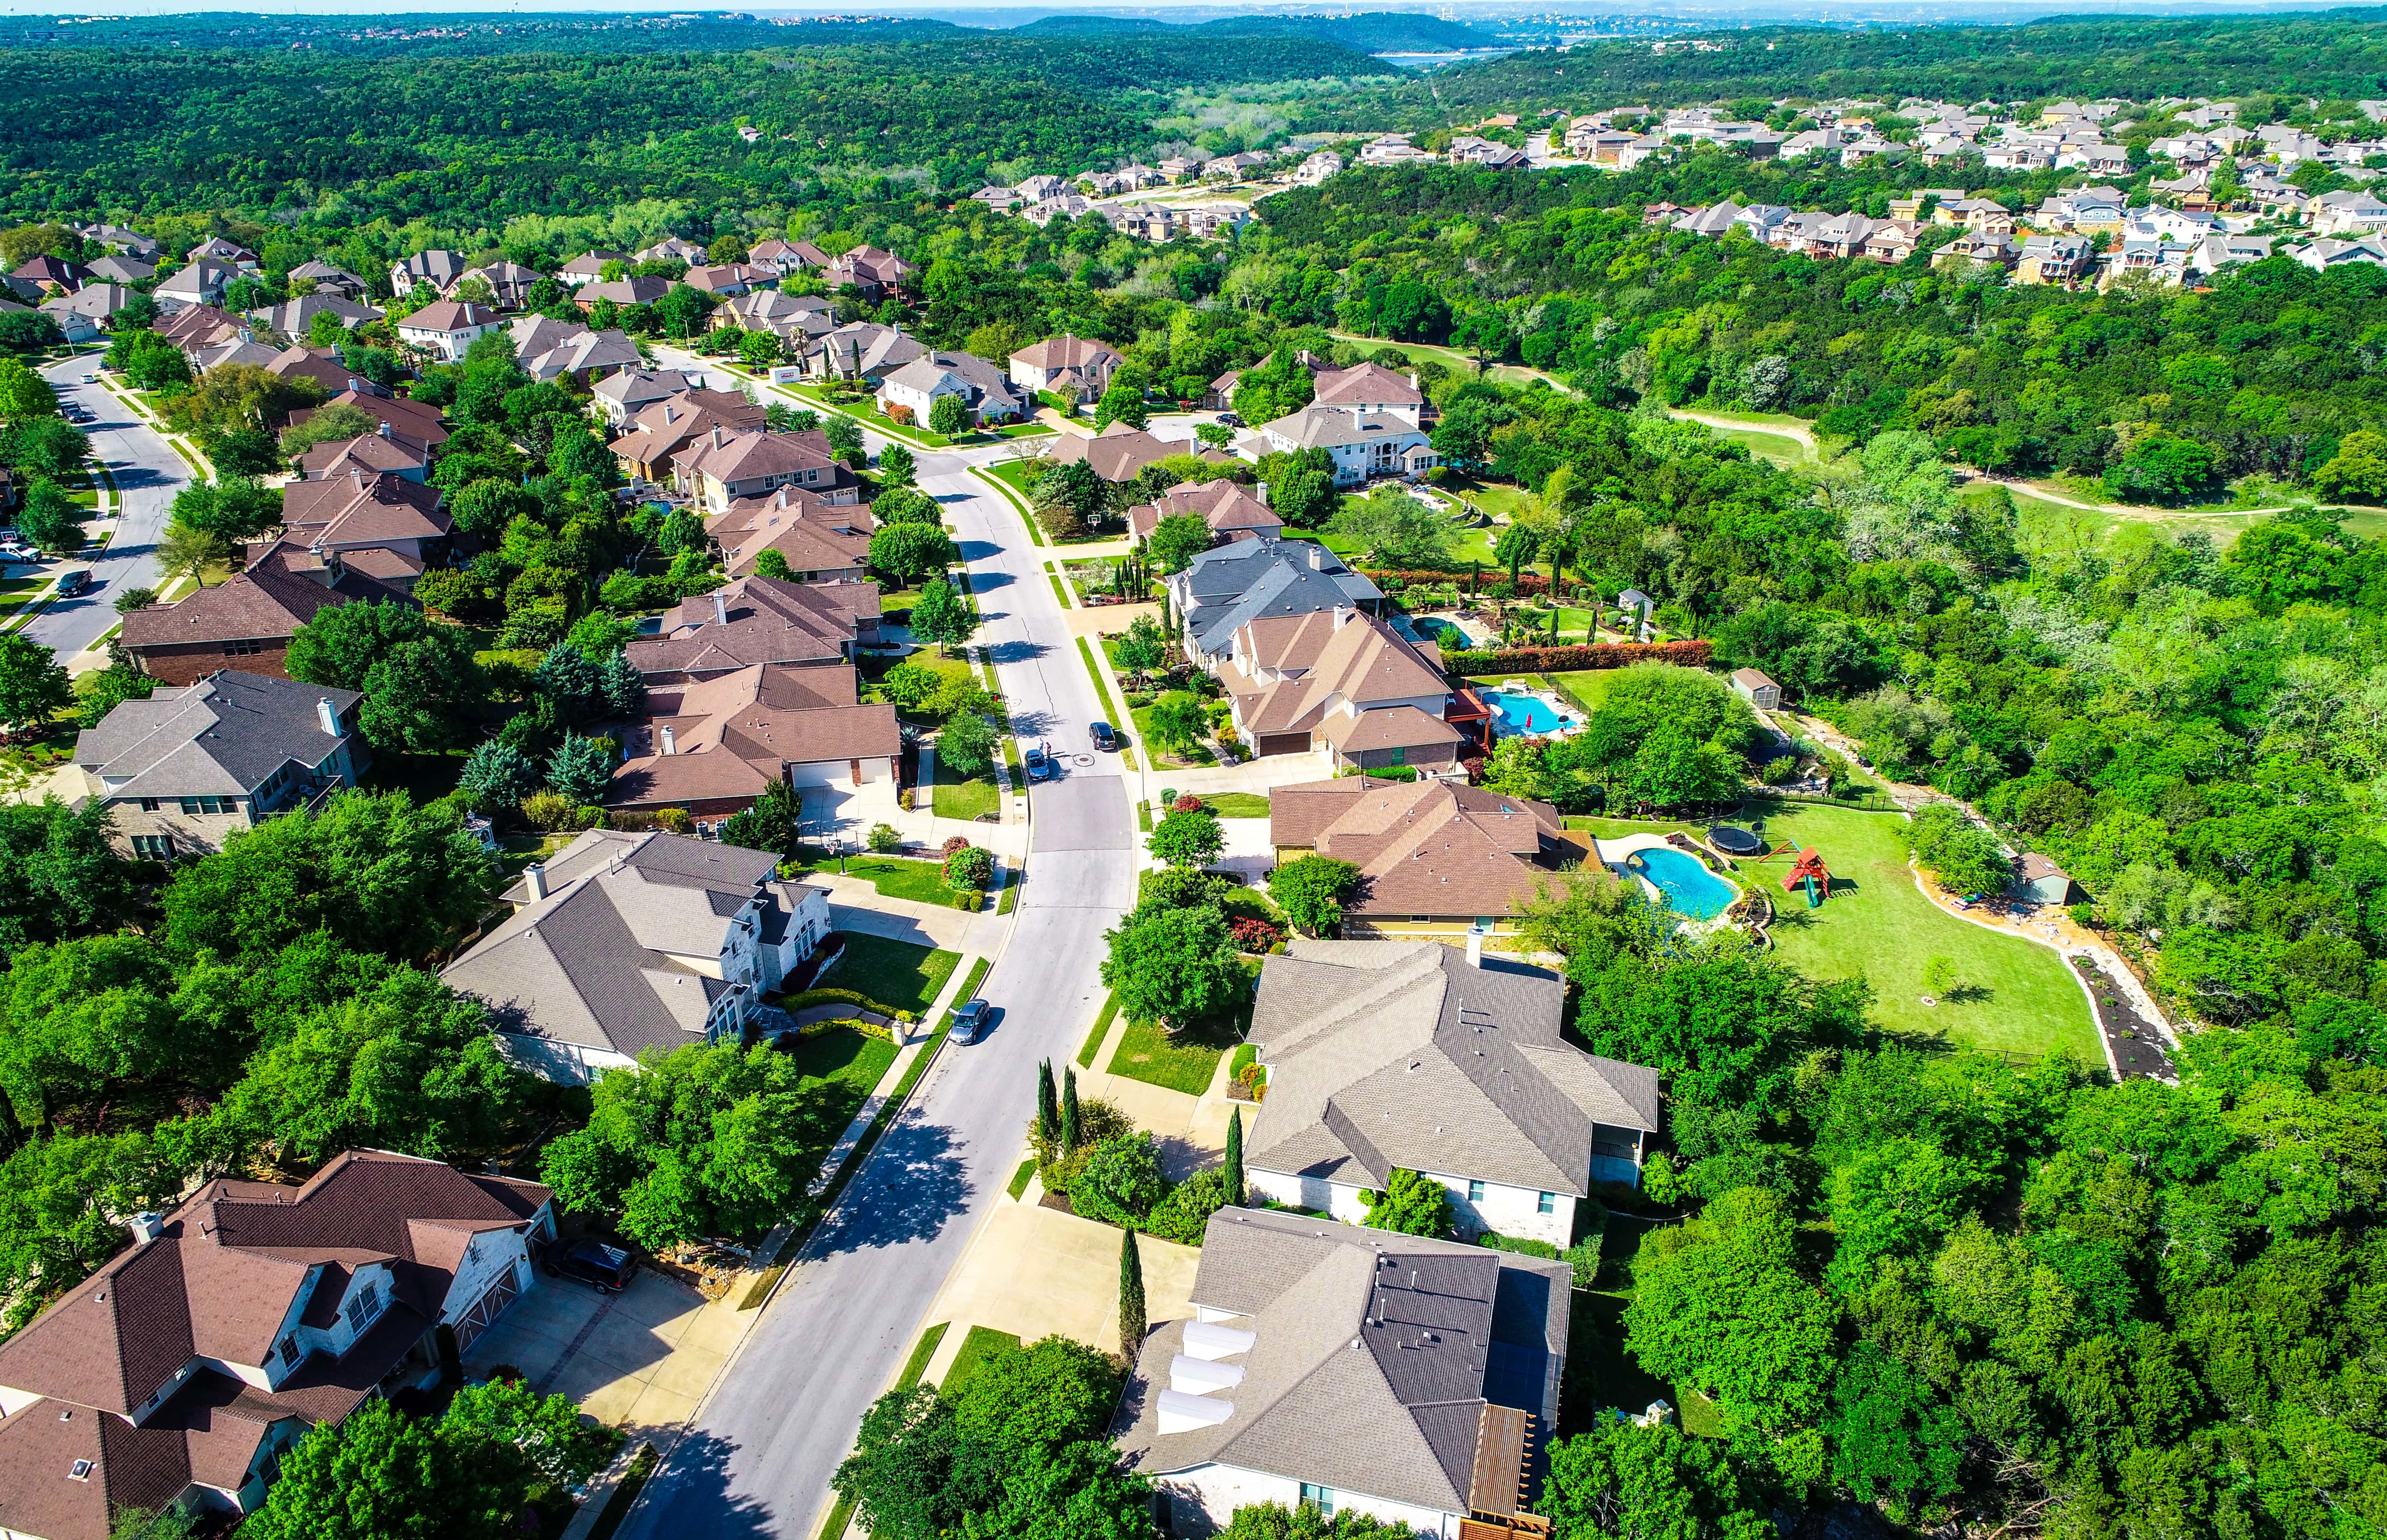 Areal view of Cedar Park / Leander, Texas residential homes.